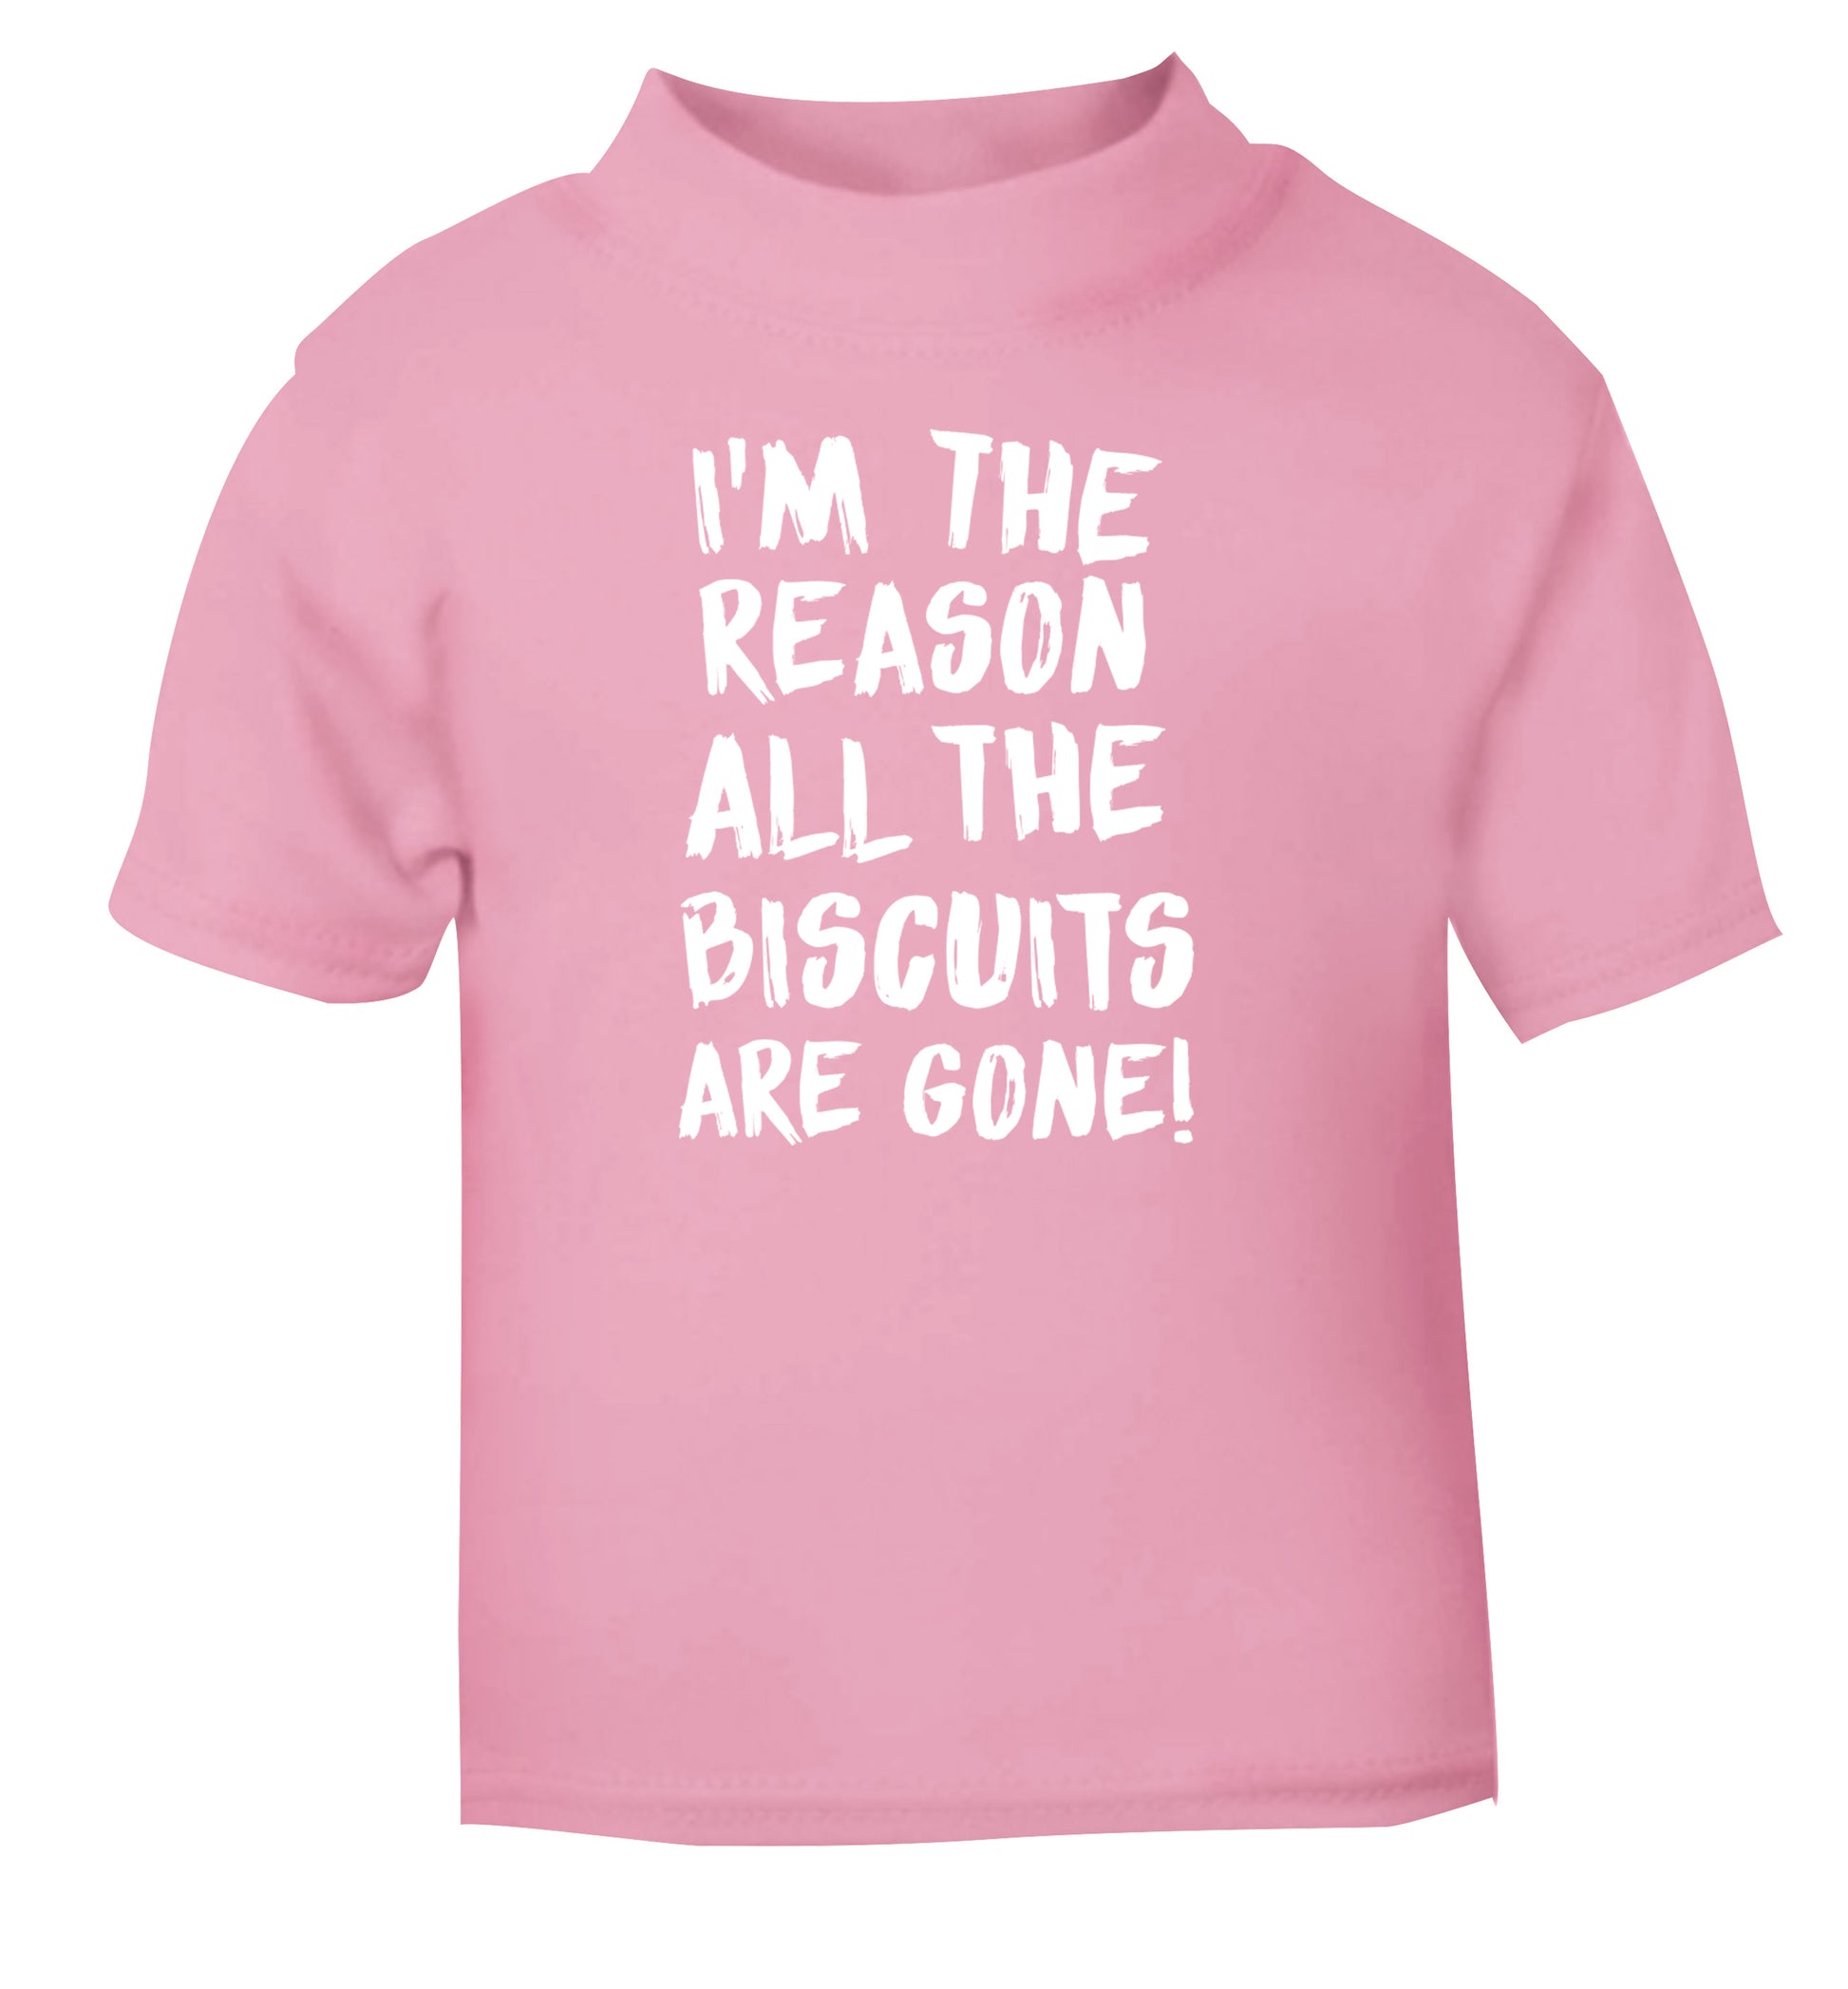 I'm the reason why all the biscuits are gone light pink Baby Toddler Tshirt 2 Years